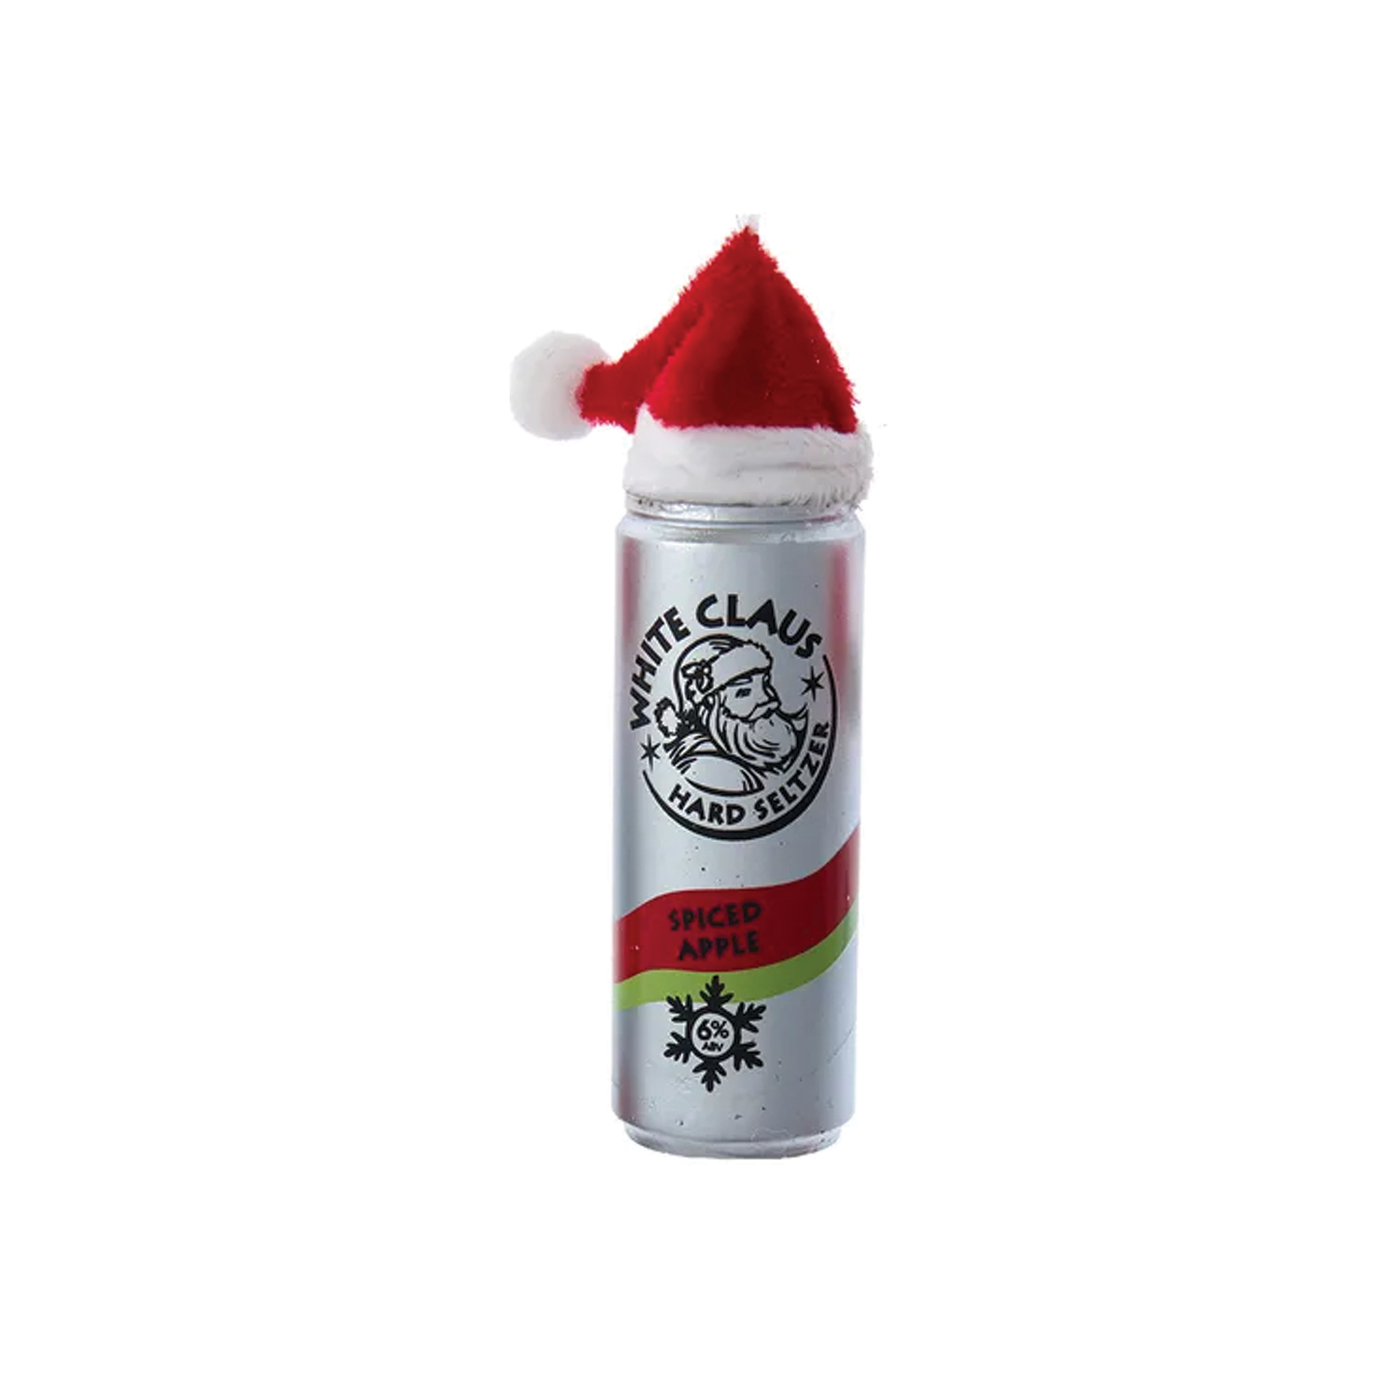 White Claus Seltzer With Santa Hat Ornament - Spiced Apple